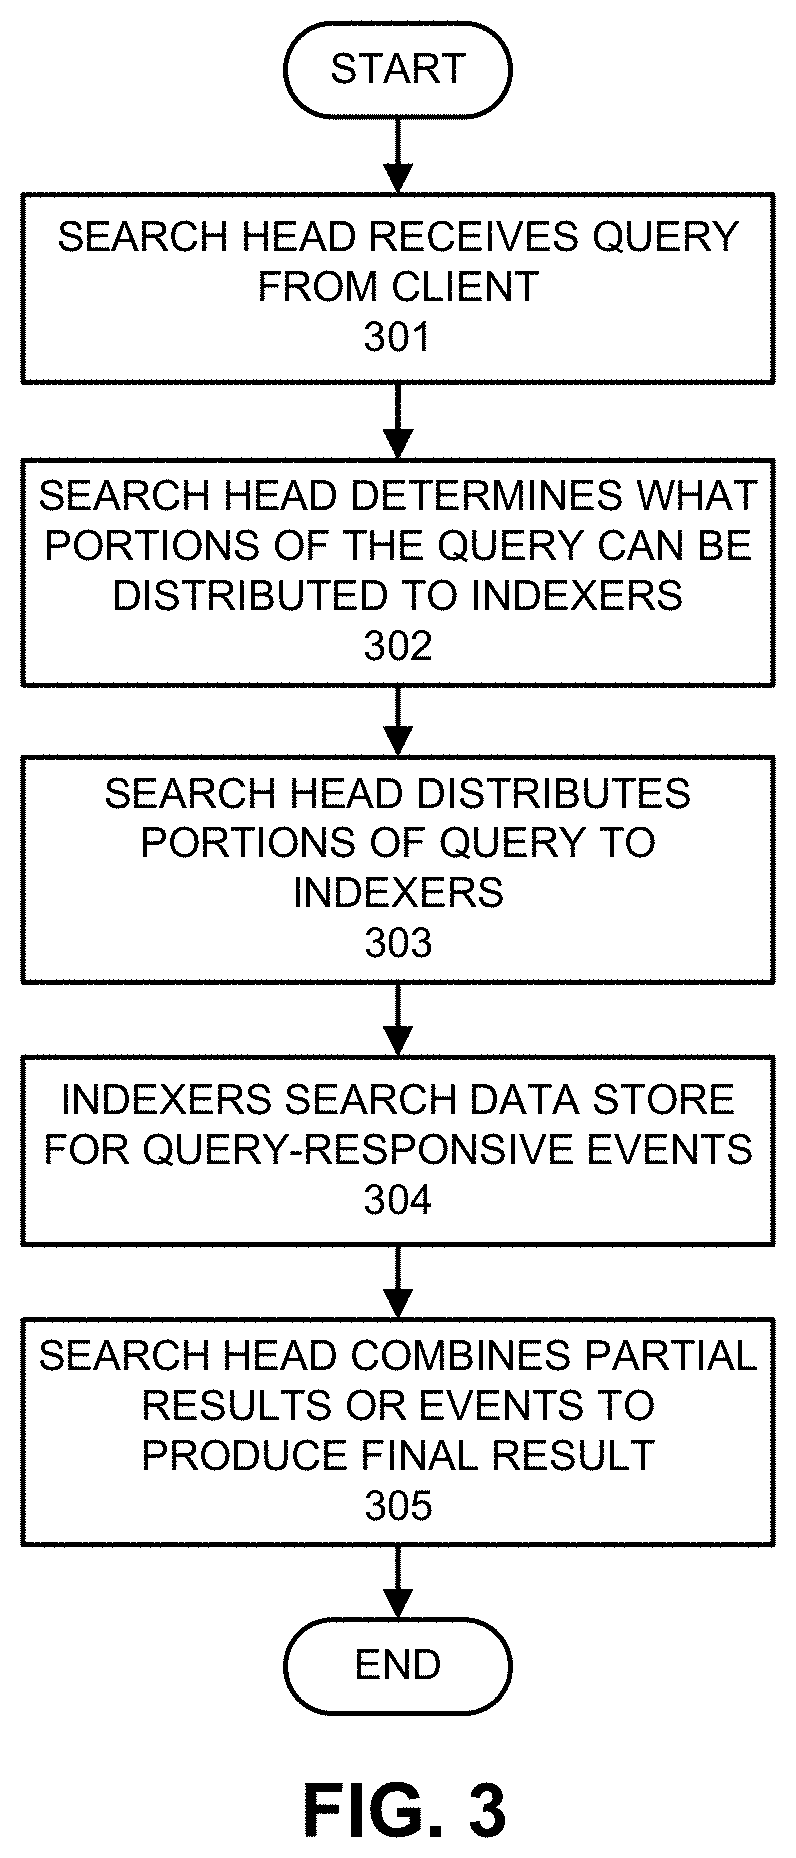 Linking event streams across applications of a data intake and query system